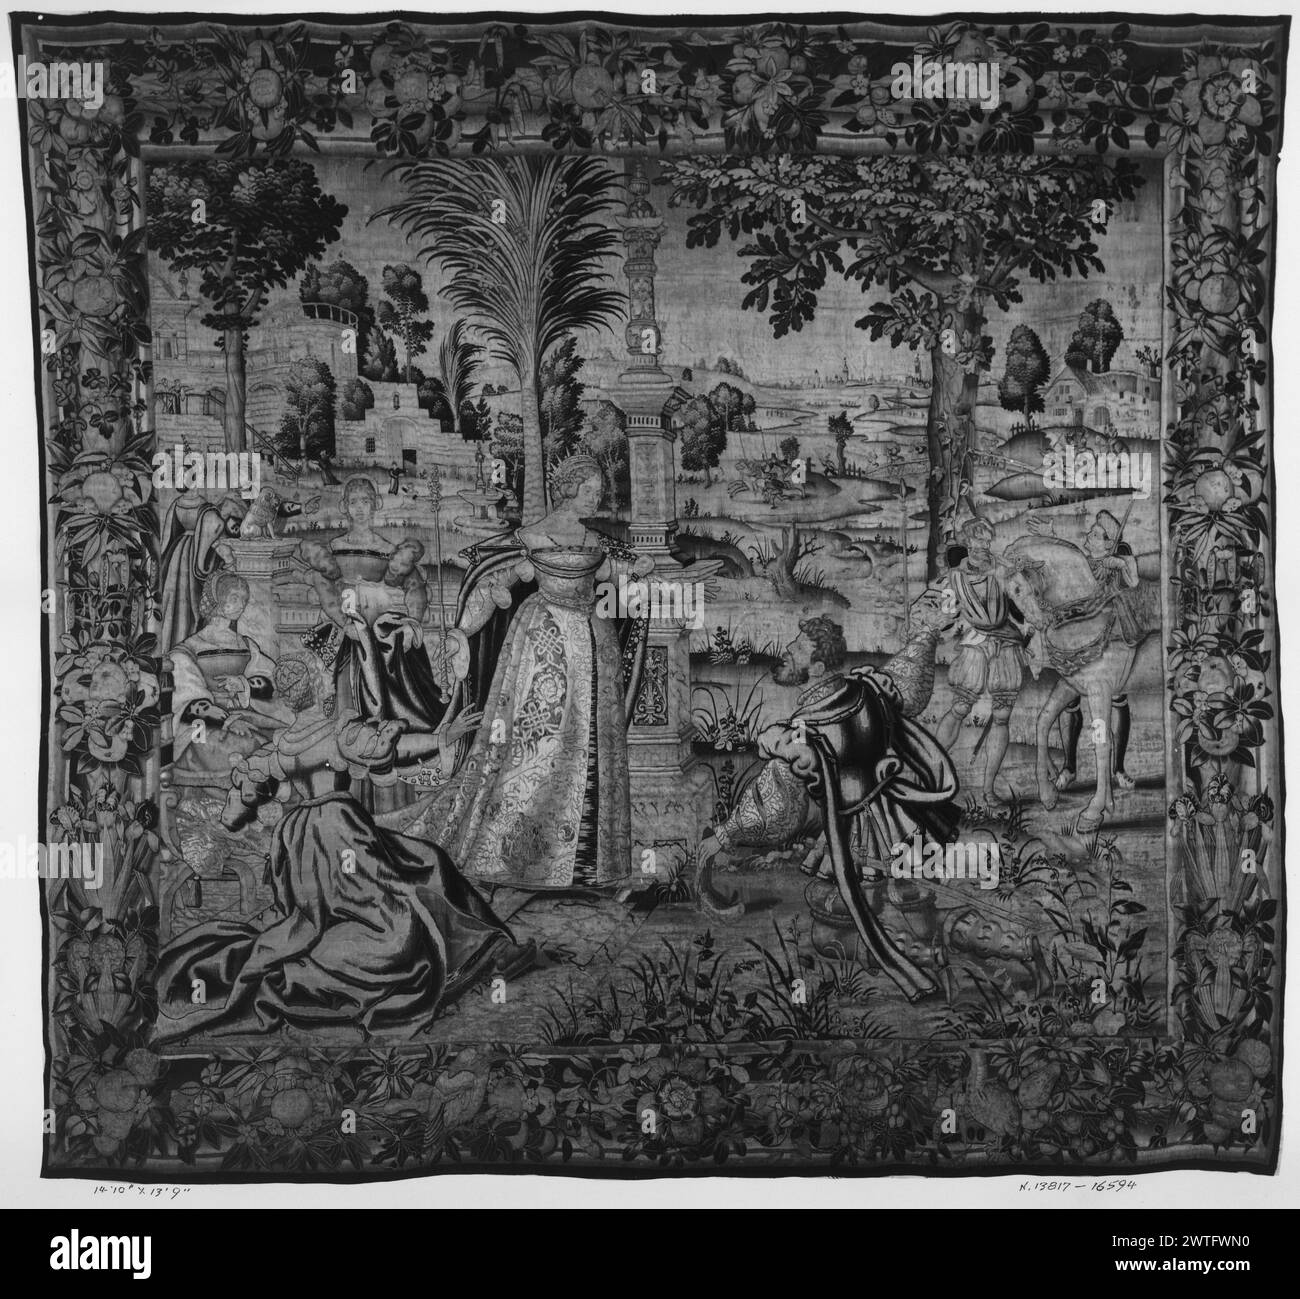 Queen Tomyris receives message from Cyrus. unknown c. 1535-1550 Tapestry Dimensions: H 13'9' x W 14'10' Tapestry Materials/Techniques: unknown Culture: Flemish Weaving Center: Brussels Ownership History: French & Co. received from Joseph Brummer, invoiced 5/25/1929; returned 5/3/1932 [SS. 16594]. French & Co. received from Mrs. Edith Strauss 10/29/1947; returned 10/21/1963 [SS 79357]. Queen Tomyris stands at steps of her palace (L of center, foreground); Cyrus' messenger kneels before her (R of center, foreground); 3 ladies-in-waiting, couple stands talking (L, middle ground); 2 men wait near Stock Photo